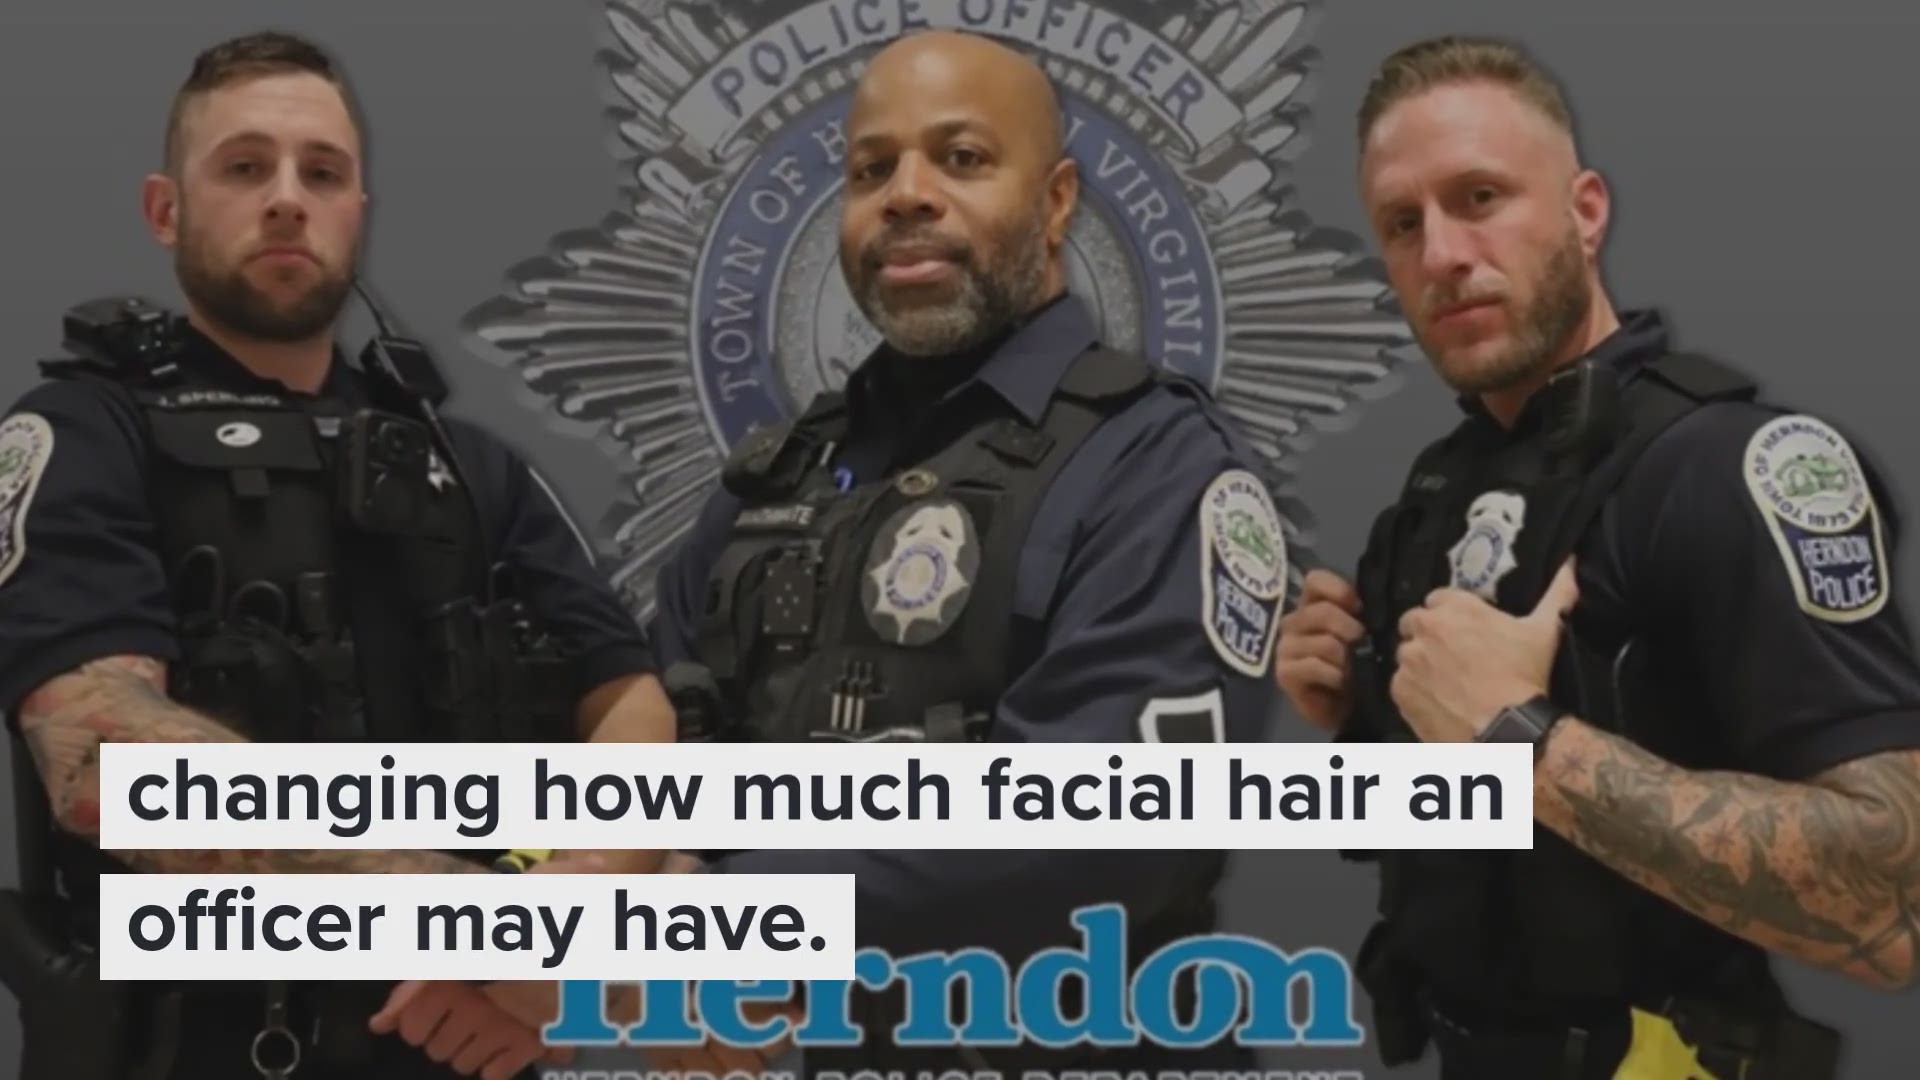 'What is most important to me as Chief is not whether our officers have facial hair, but how they treat, interact with and serve the community.'